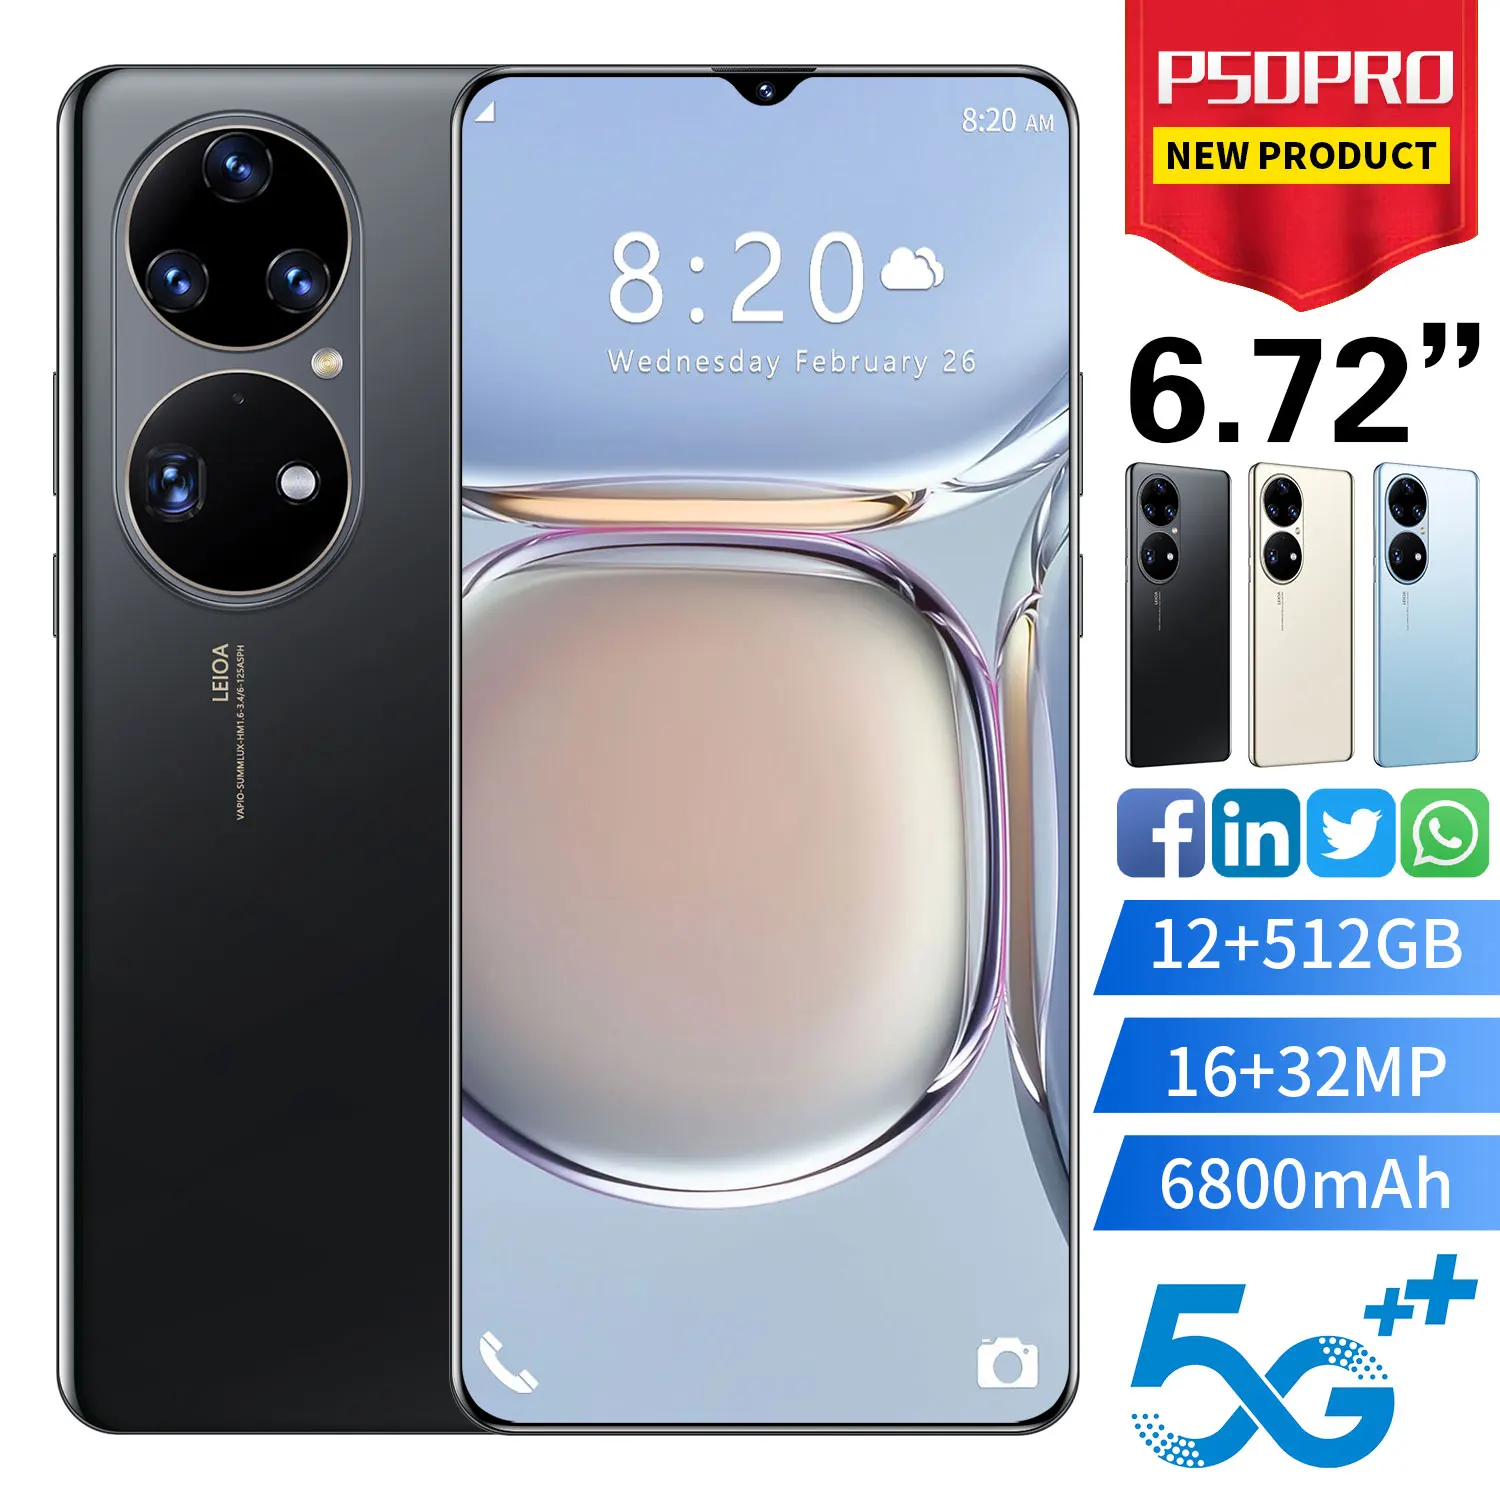 

Hot Selling P50 PRO Unlocked 16+32MP 10 Core Dual SIM 12GB+512GB Cheap Smart Phone 6.72 inch Android 8.0 Mobile SmartPhones, Black blue gold